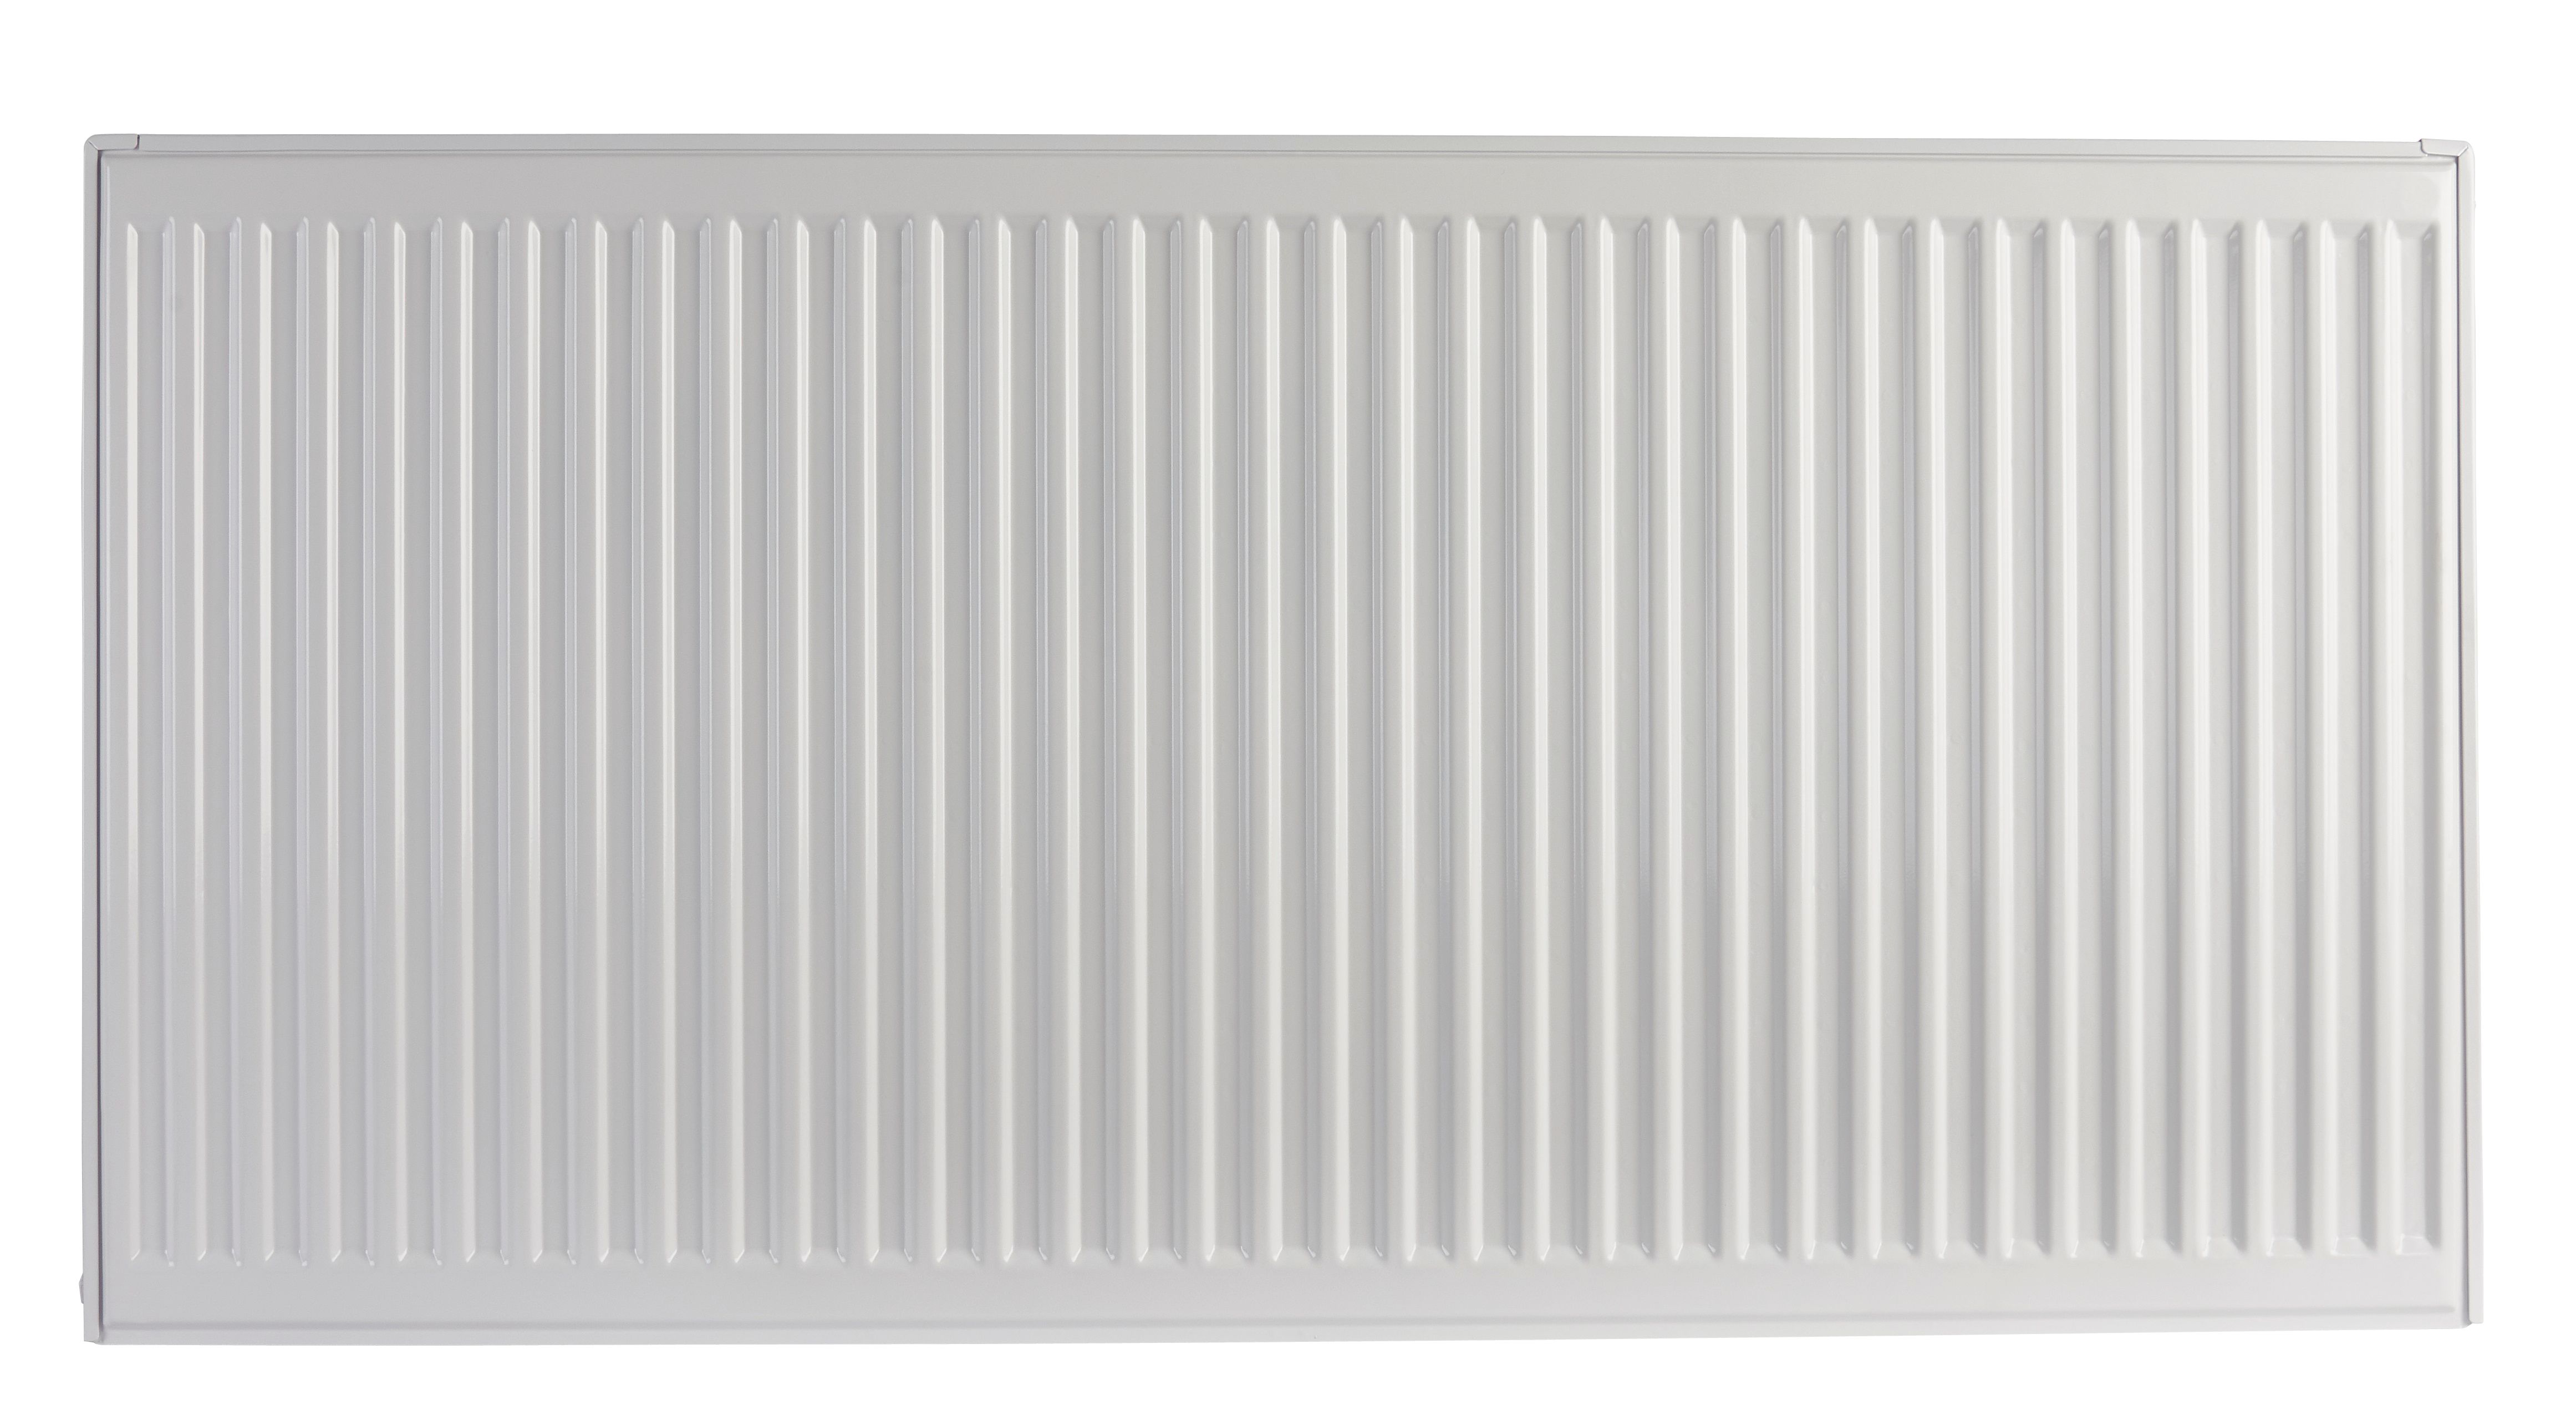 Image of Homeline by Stelrad 600 x 1100mm Type 22 Double Panel Premium Double Convector Radiator